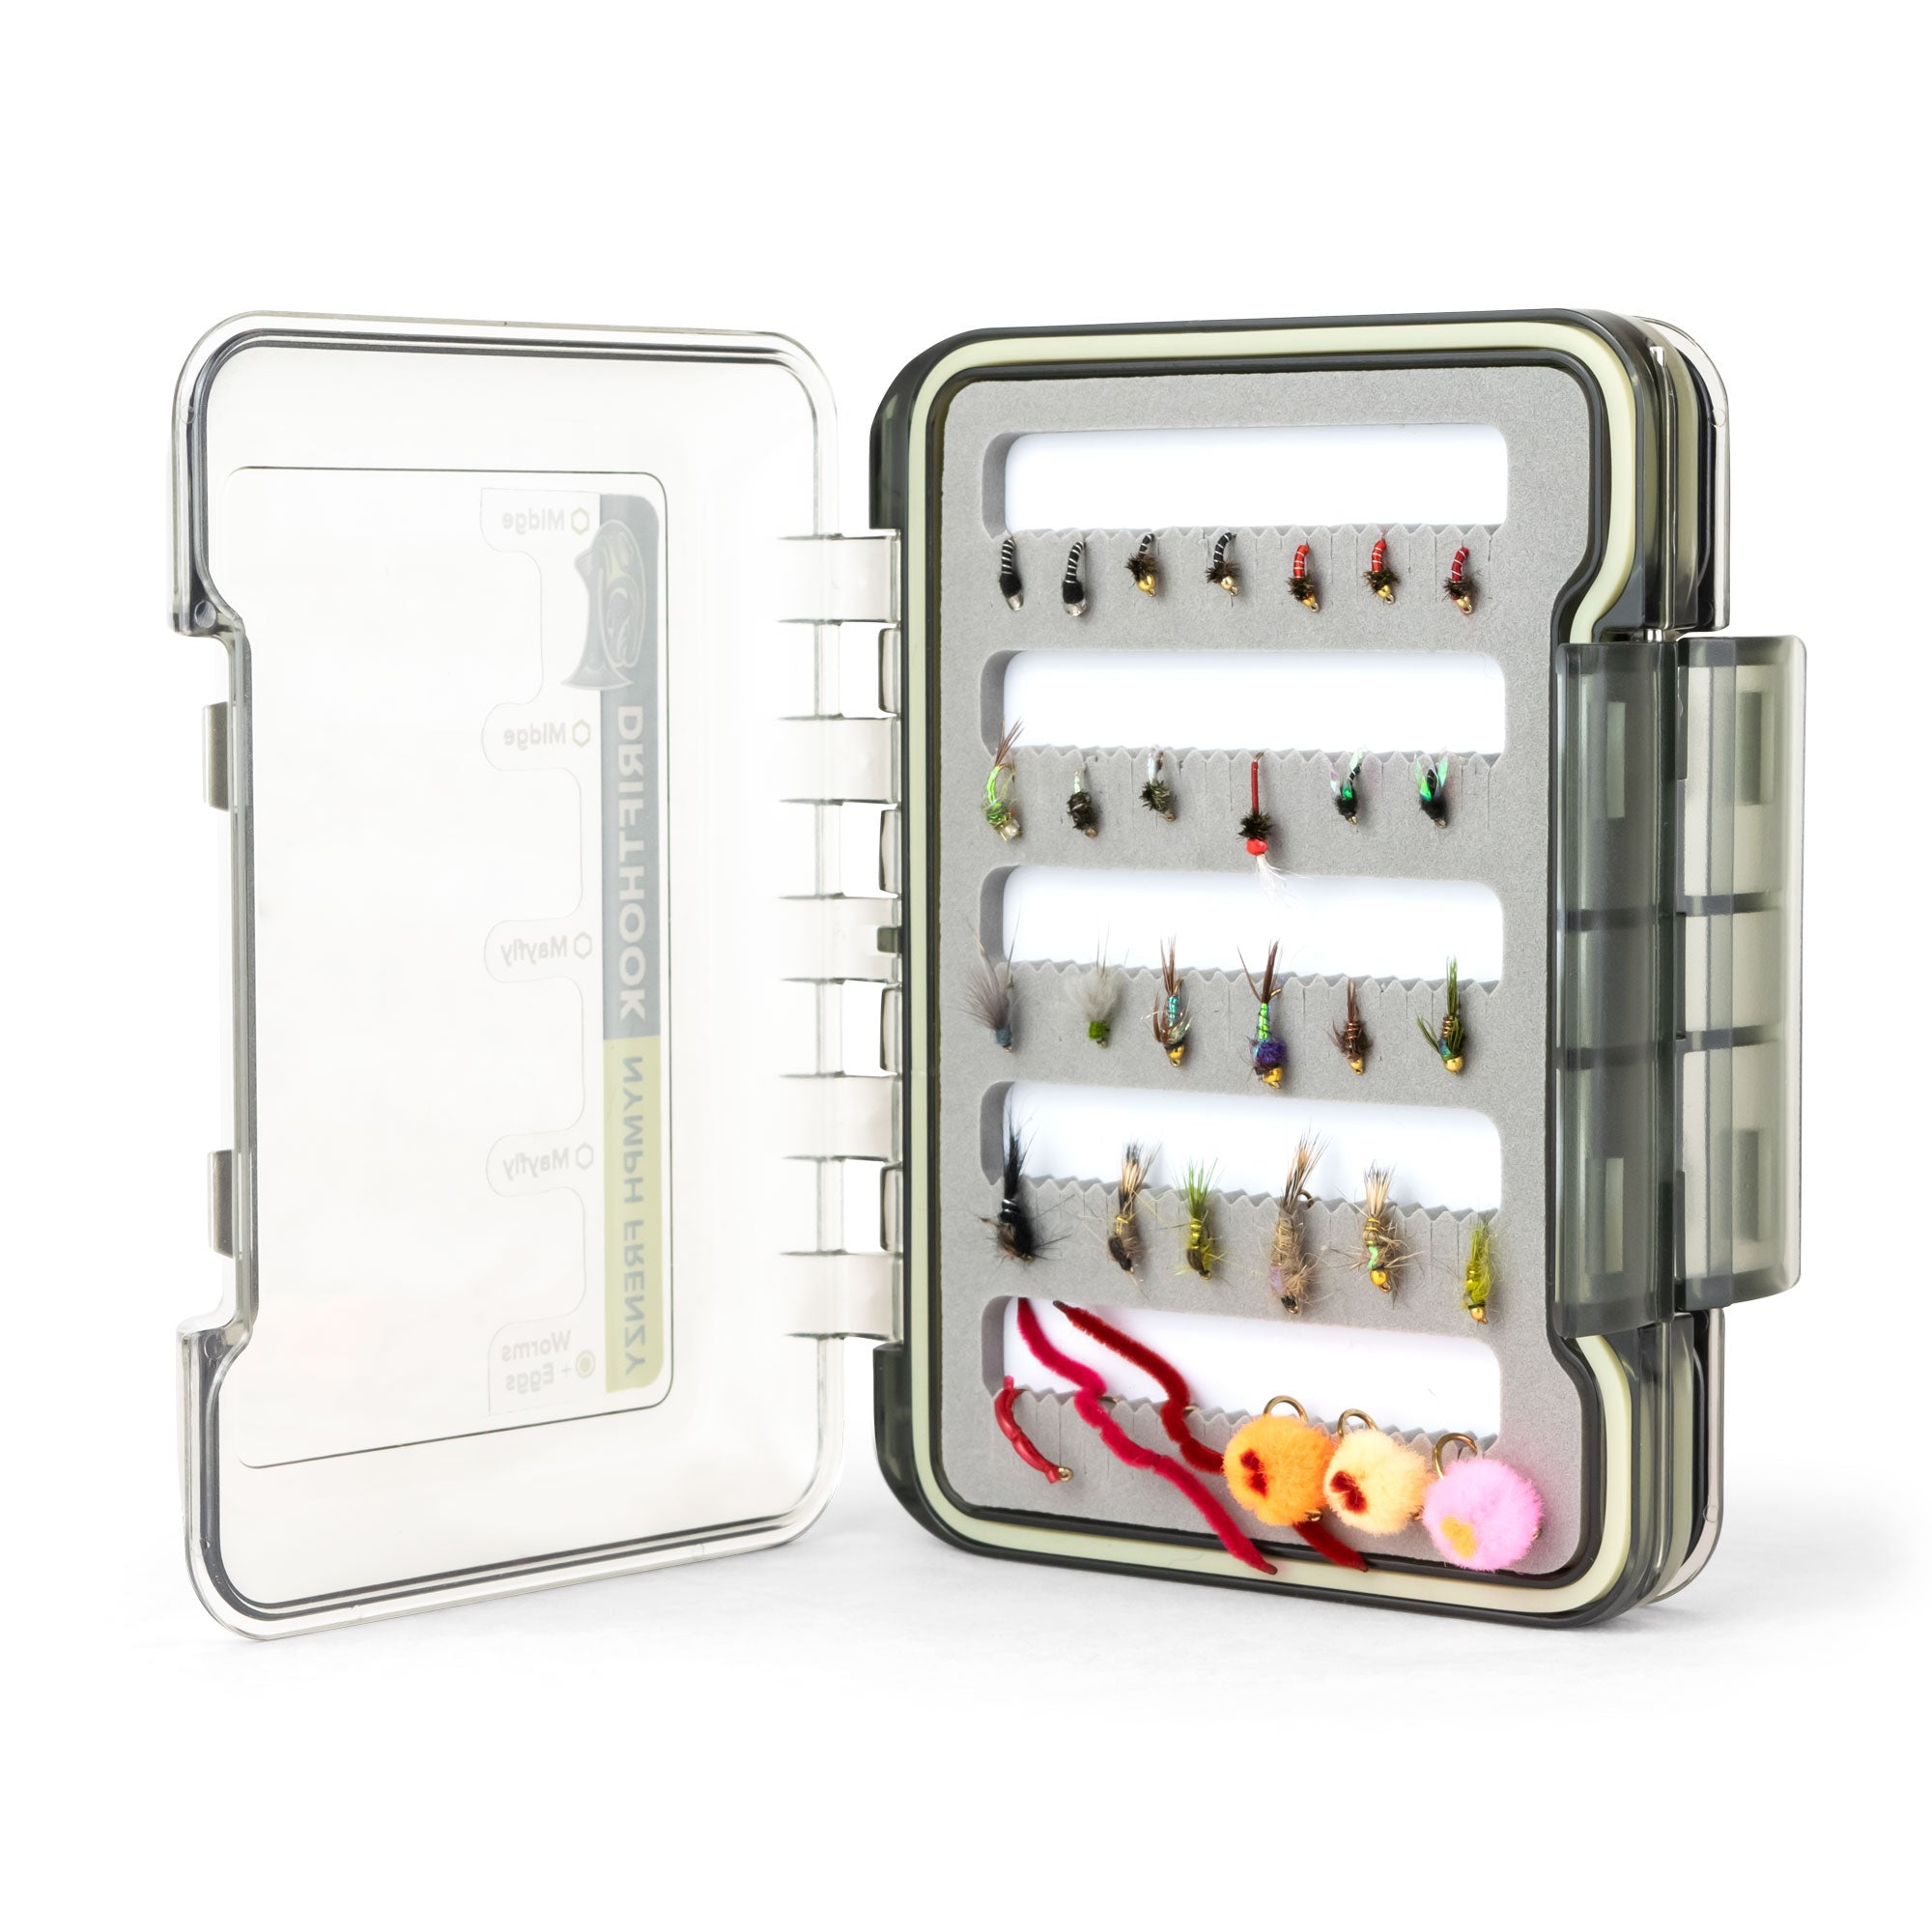 CHSEEO Fly Fishing Flie Kit with Box 20pcs Fishing Lure Set Fly Fishing  Lures Dry Flies Wet Flies Nymphs Emergers Streamers Bait Hook Crankbaits  for